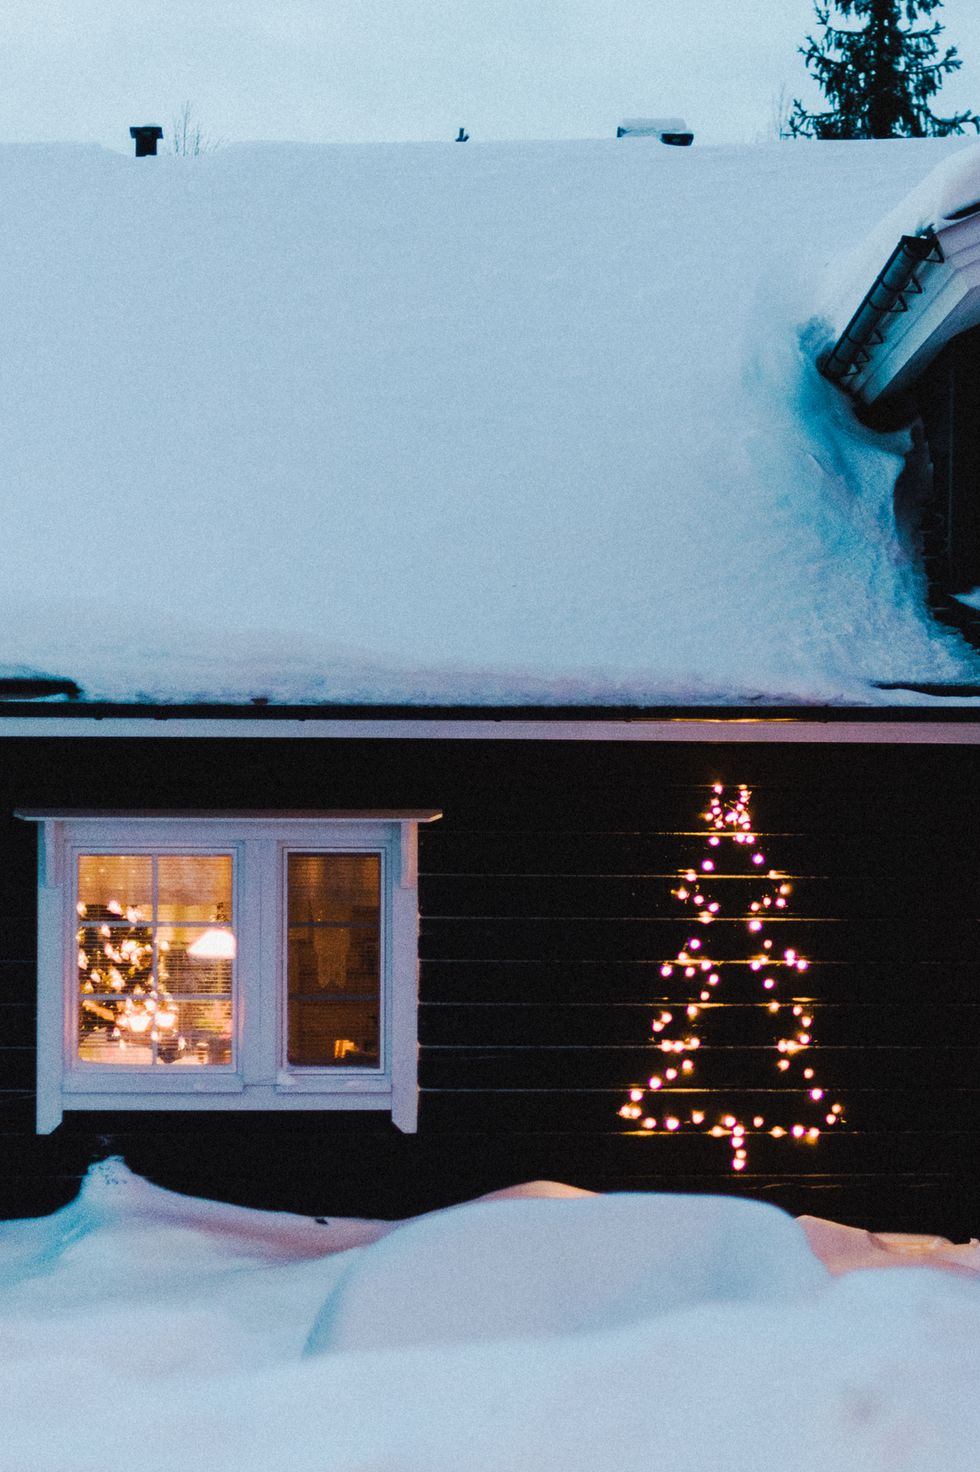 a view of a christmas tree made of lights on the side of a house stock photo